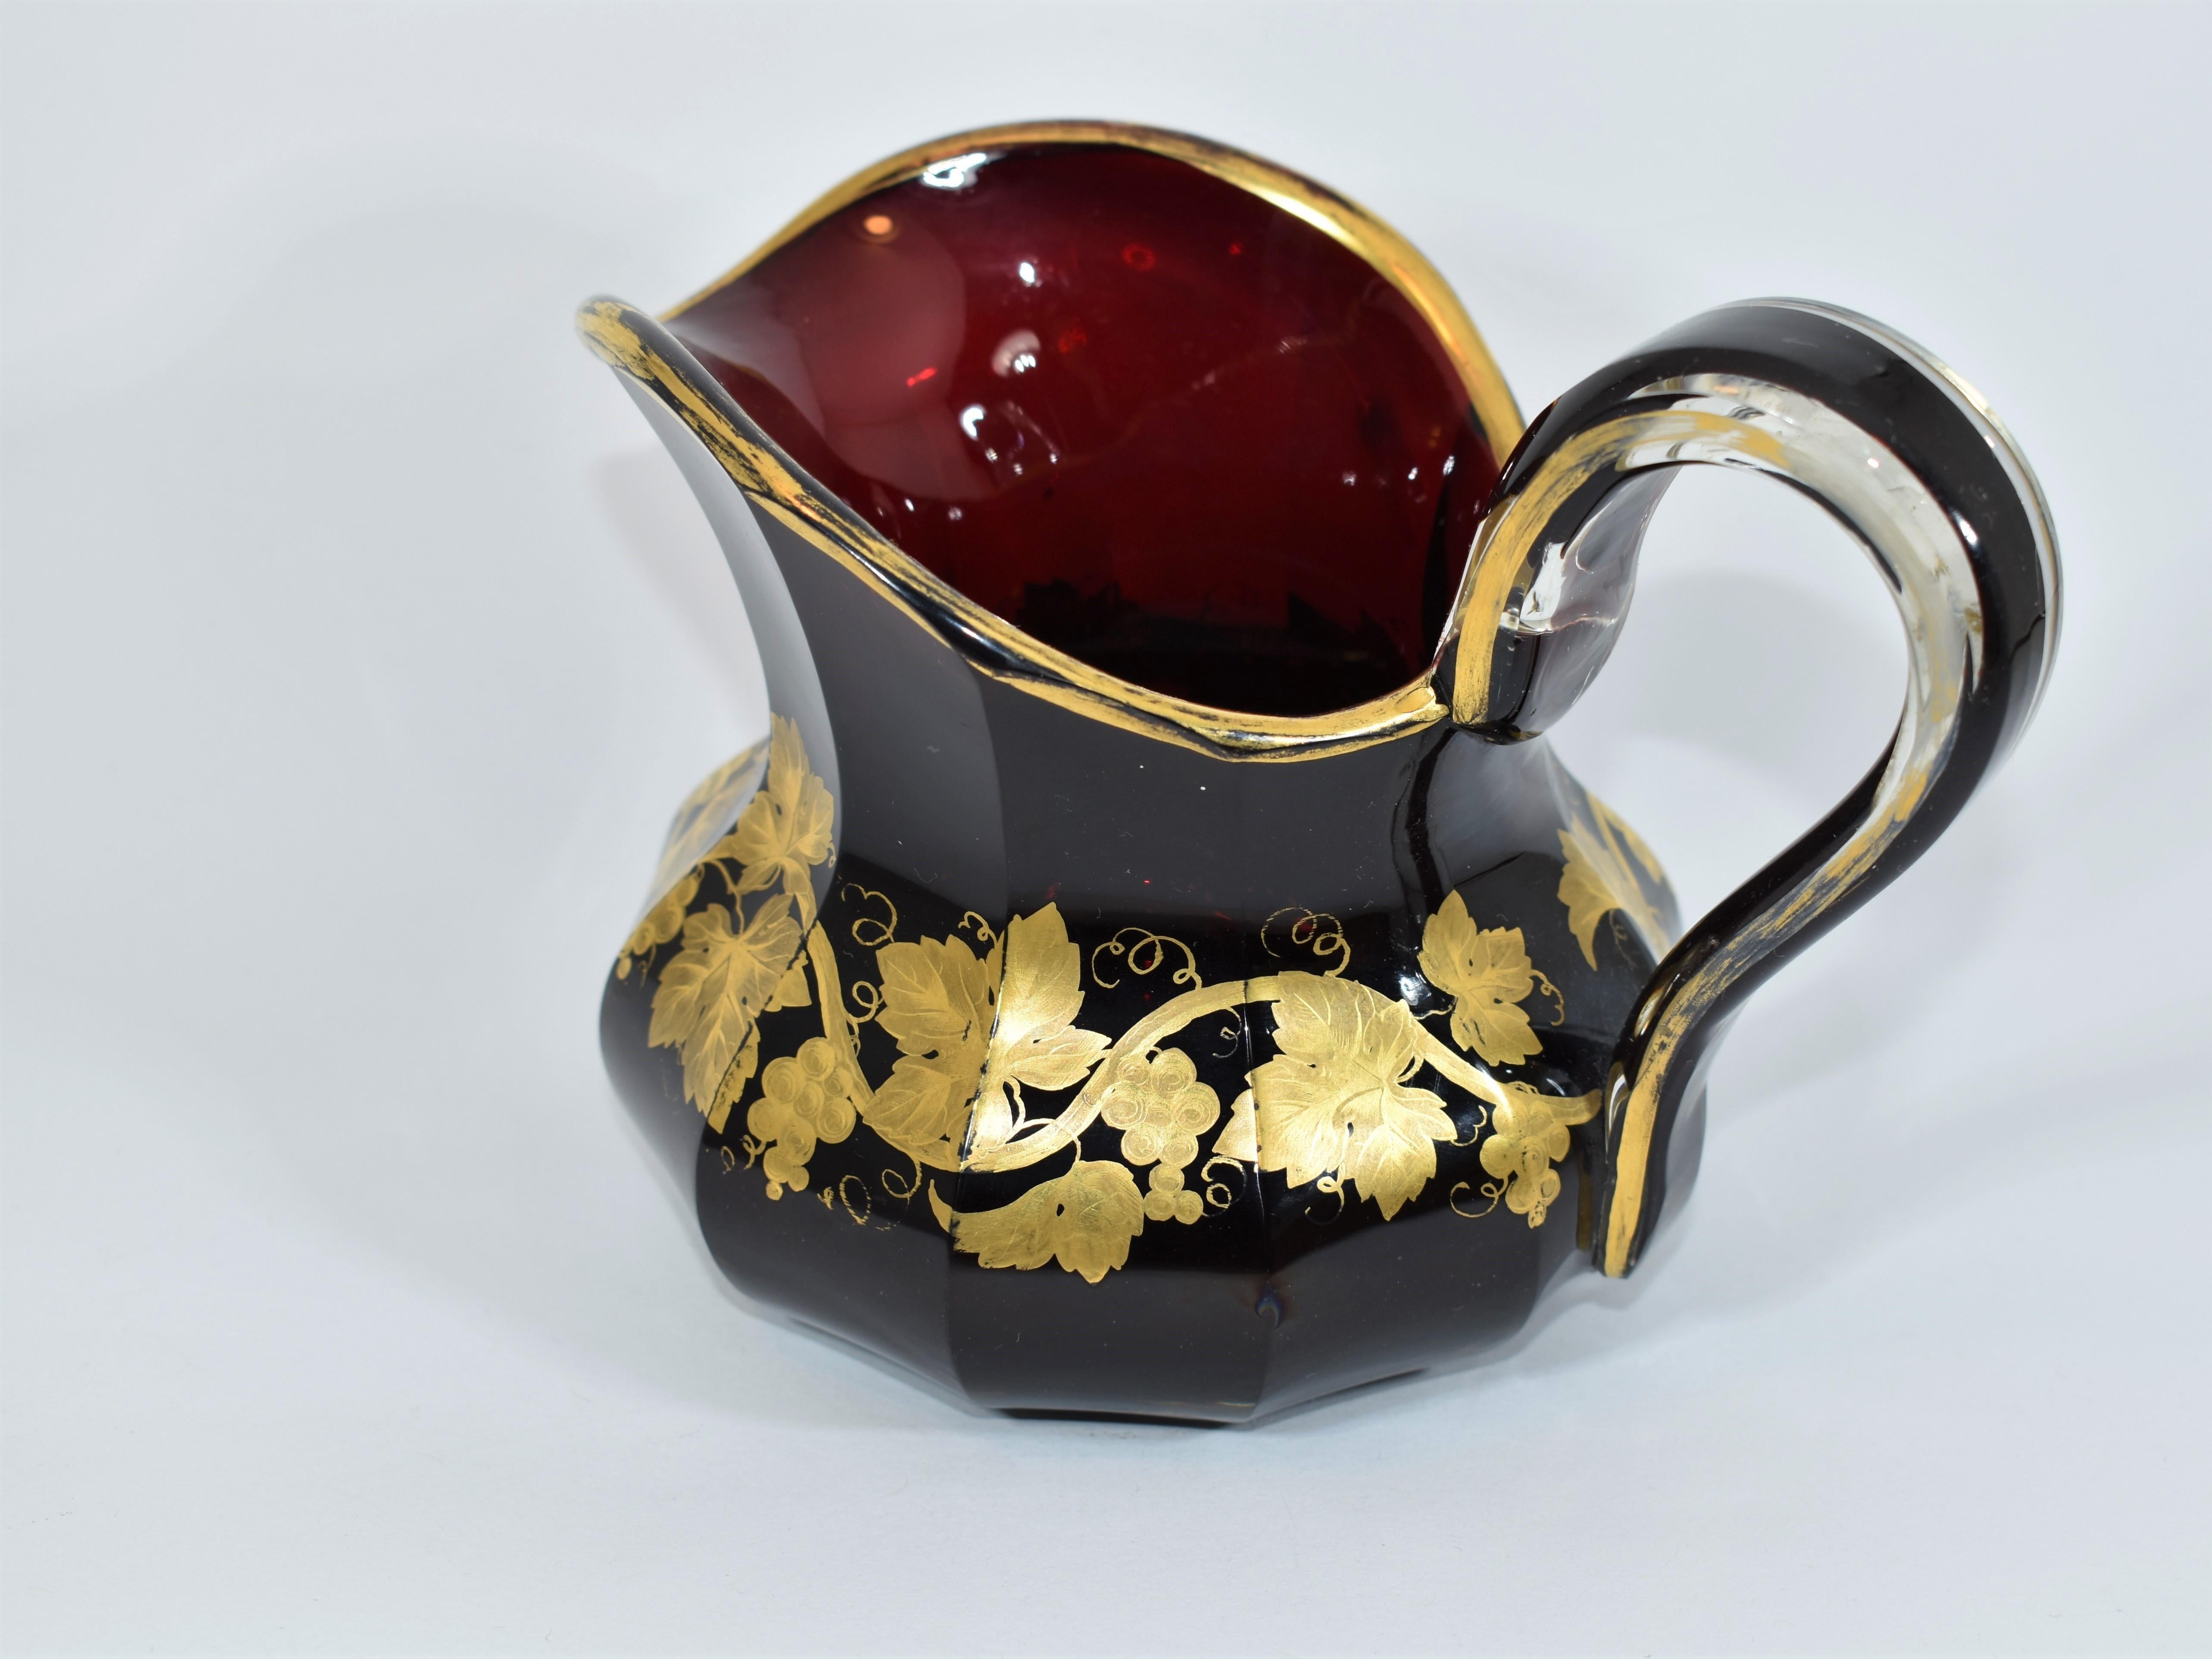 Antique Bohemian Ruby Red Gilded Glass Jug, Pitcher, 19th Century In Good Condition For Sale In Rostock, MV